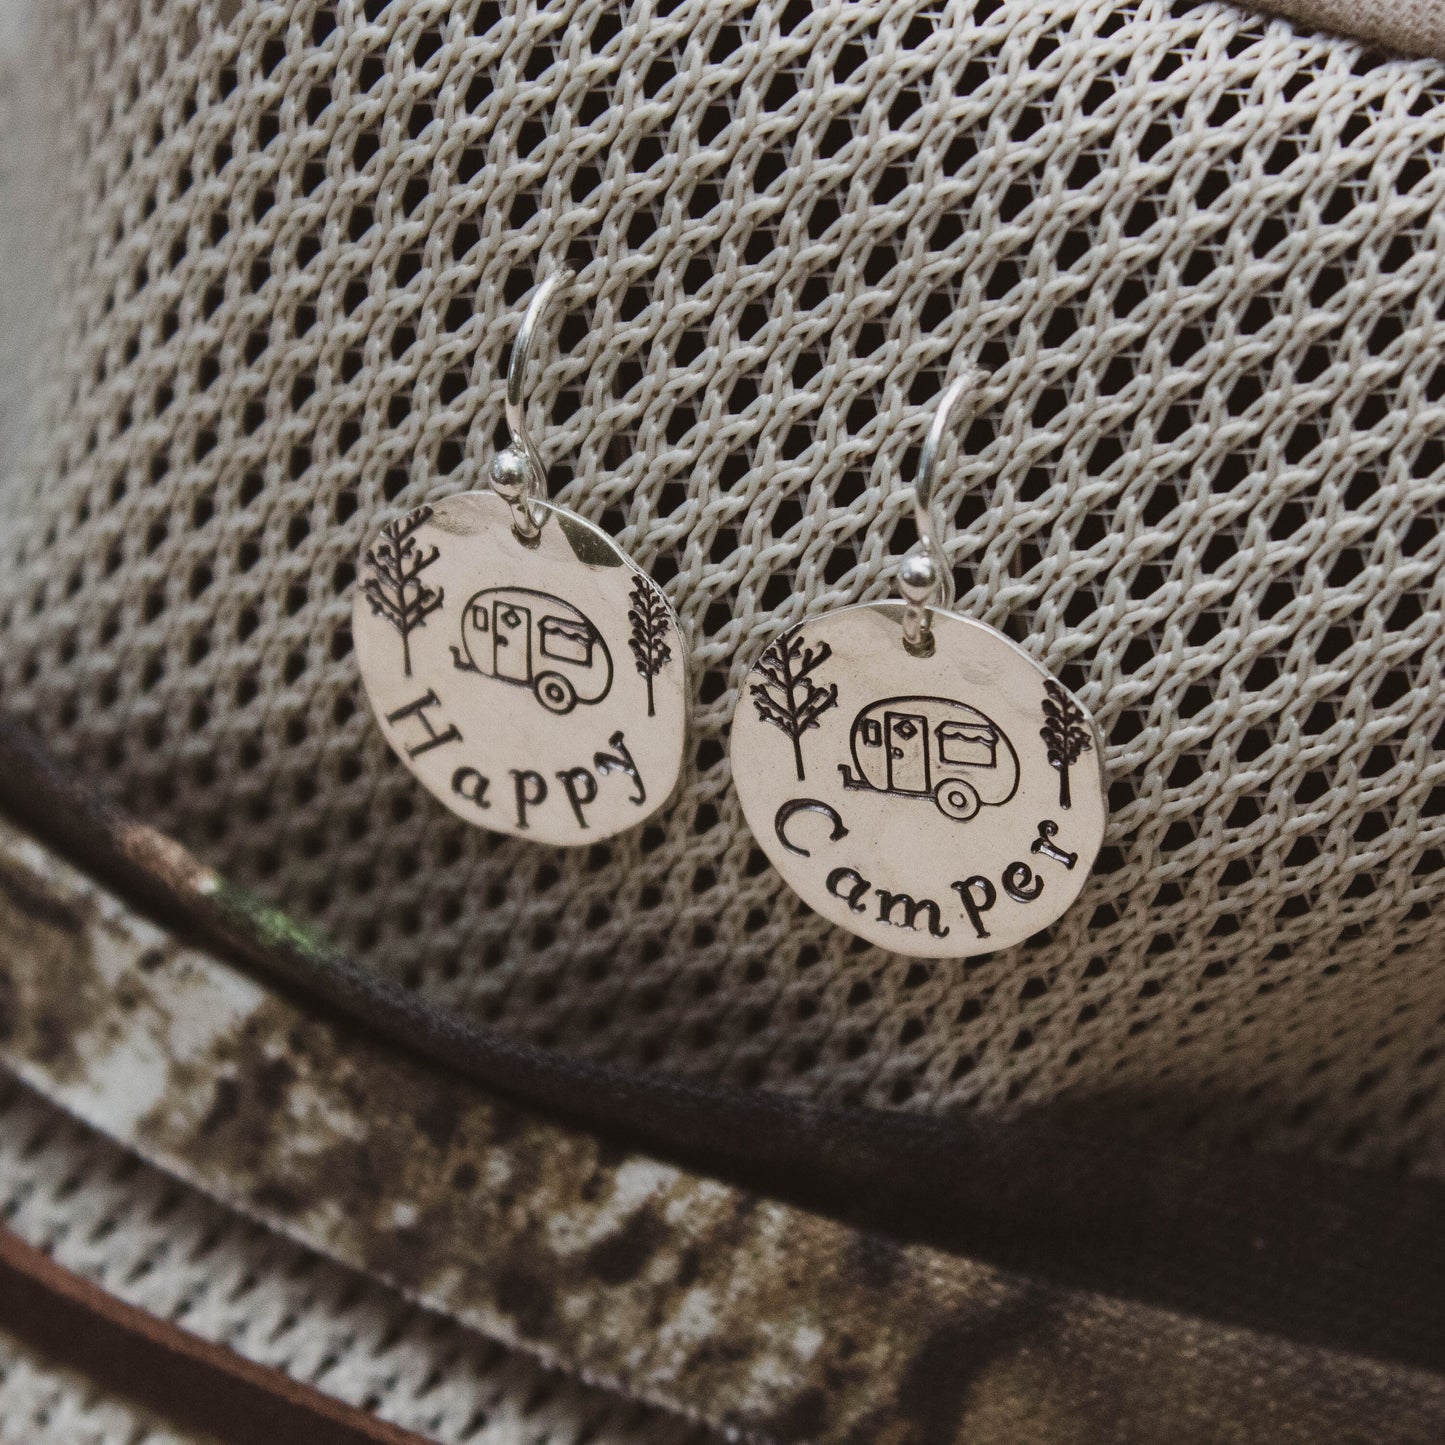 Happy Camper Sterling Silver Earrings, Airstream Camper Jewelry, Hand Stamped Personalized Earrings, Camper Jewelry Camping Gift for Her